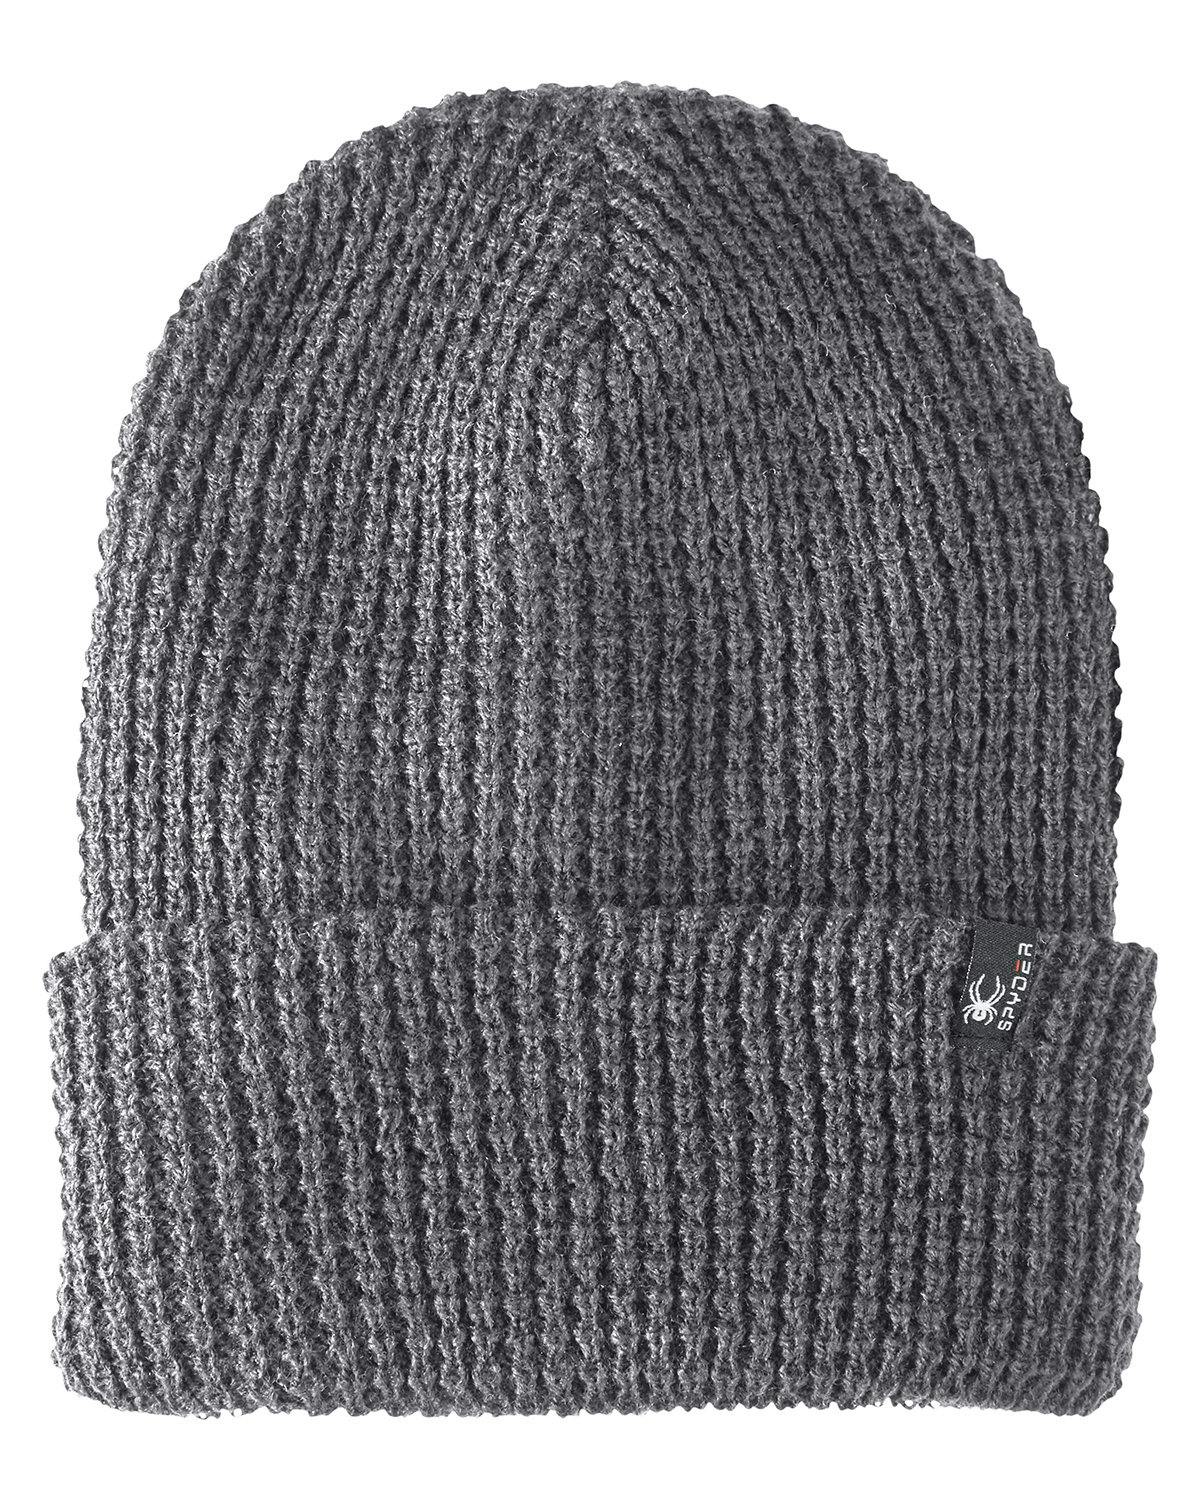 Image for Adult Vertex Knit Beanie